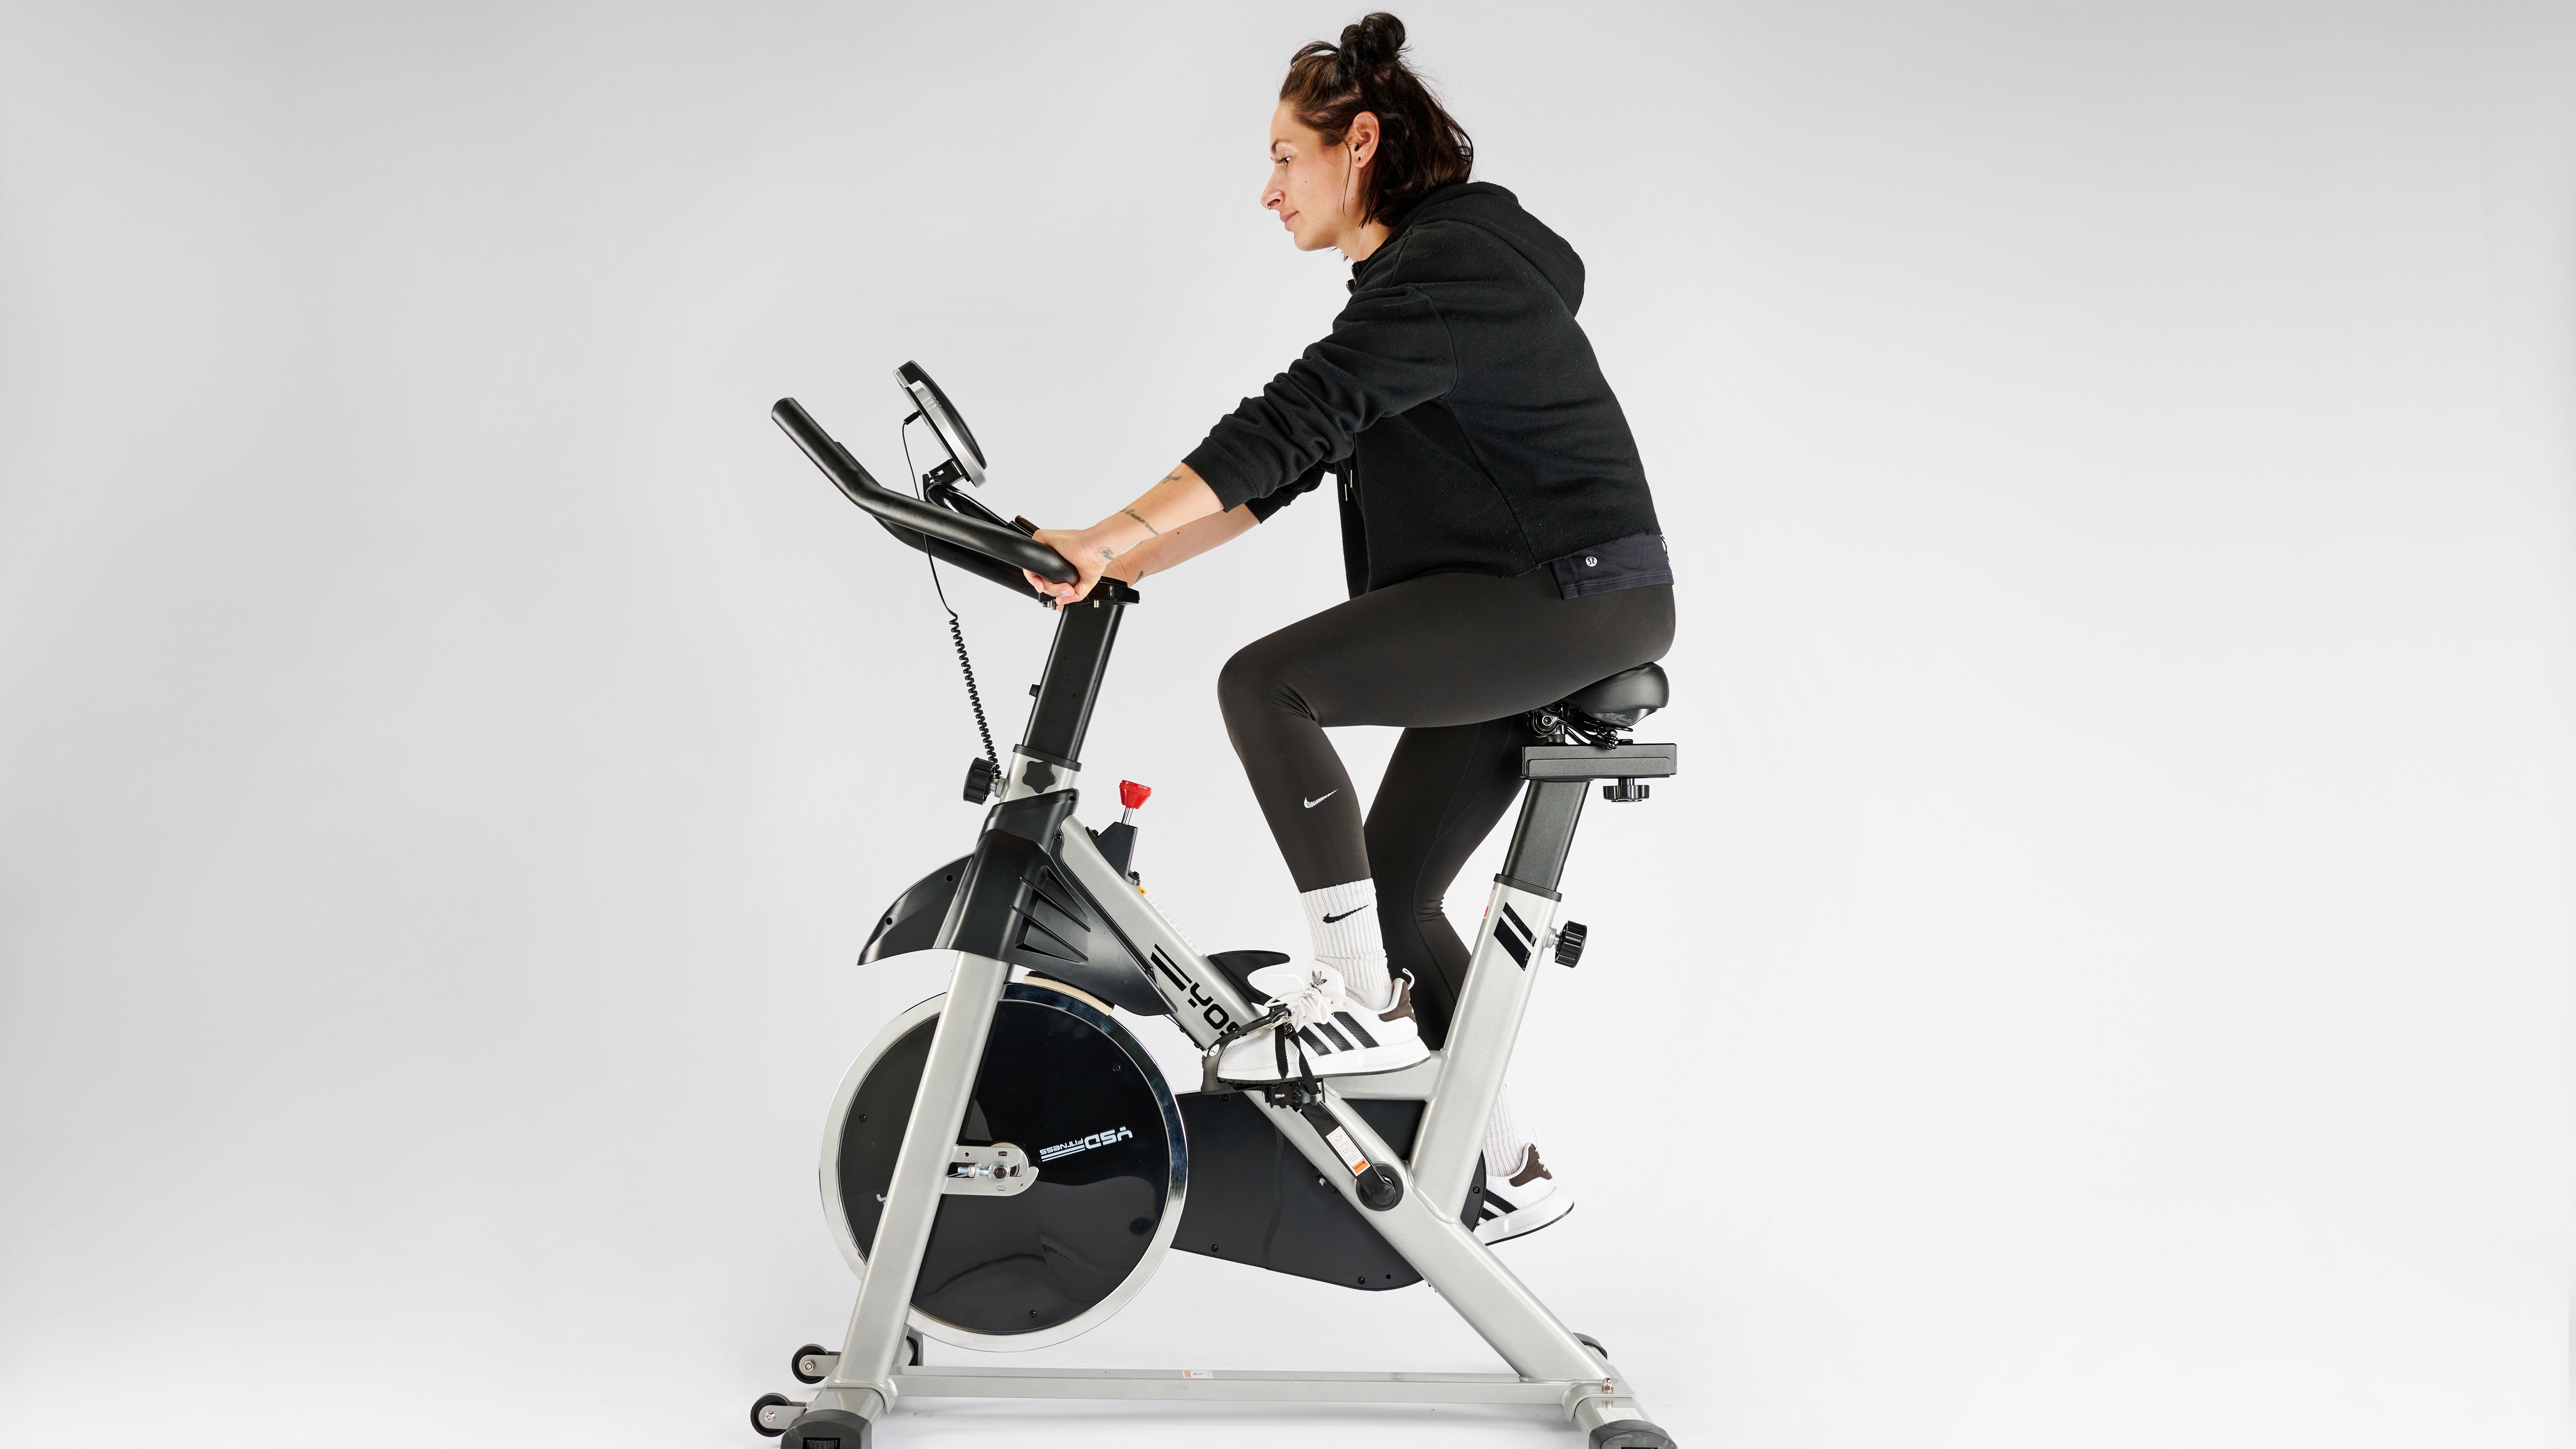 Yosuda exercise bike being tested by Sam Hopes, resident fitness writer at Live Science